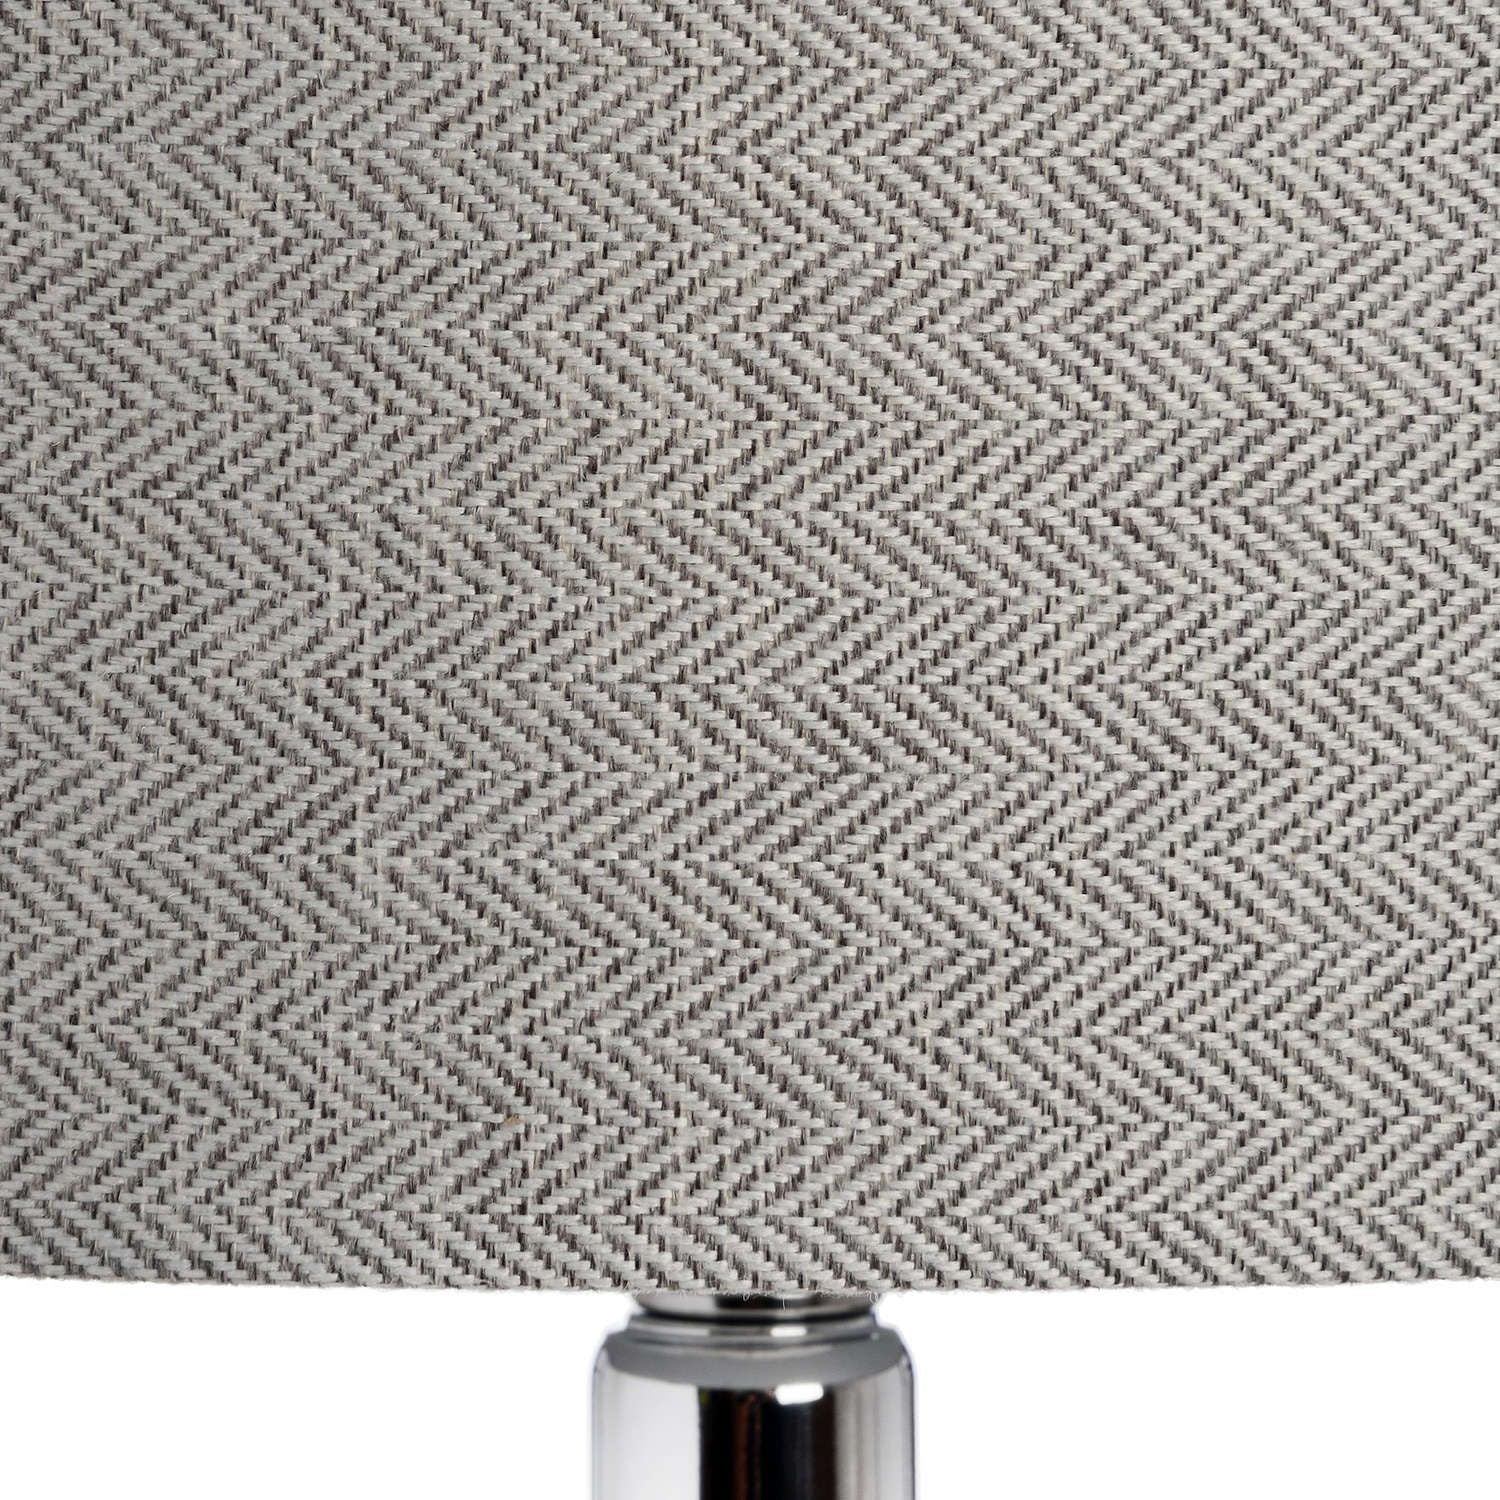 Silver and glass table lamp with grey shade, called Belgravia